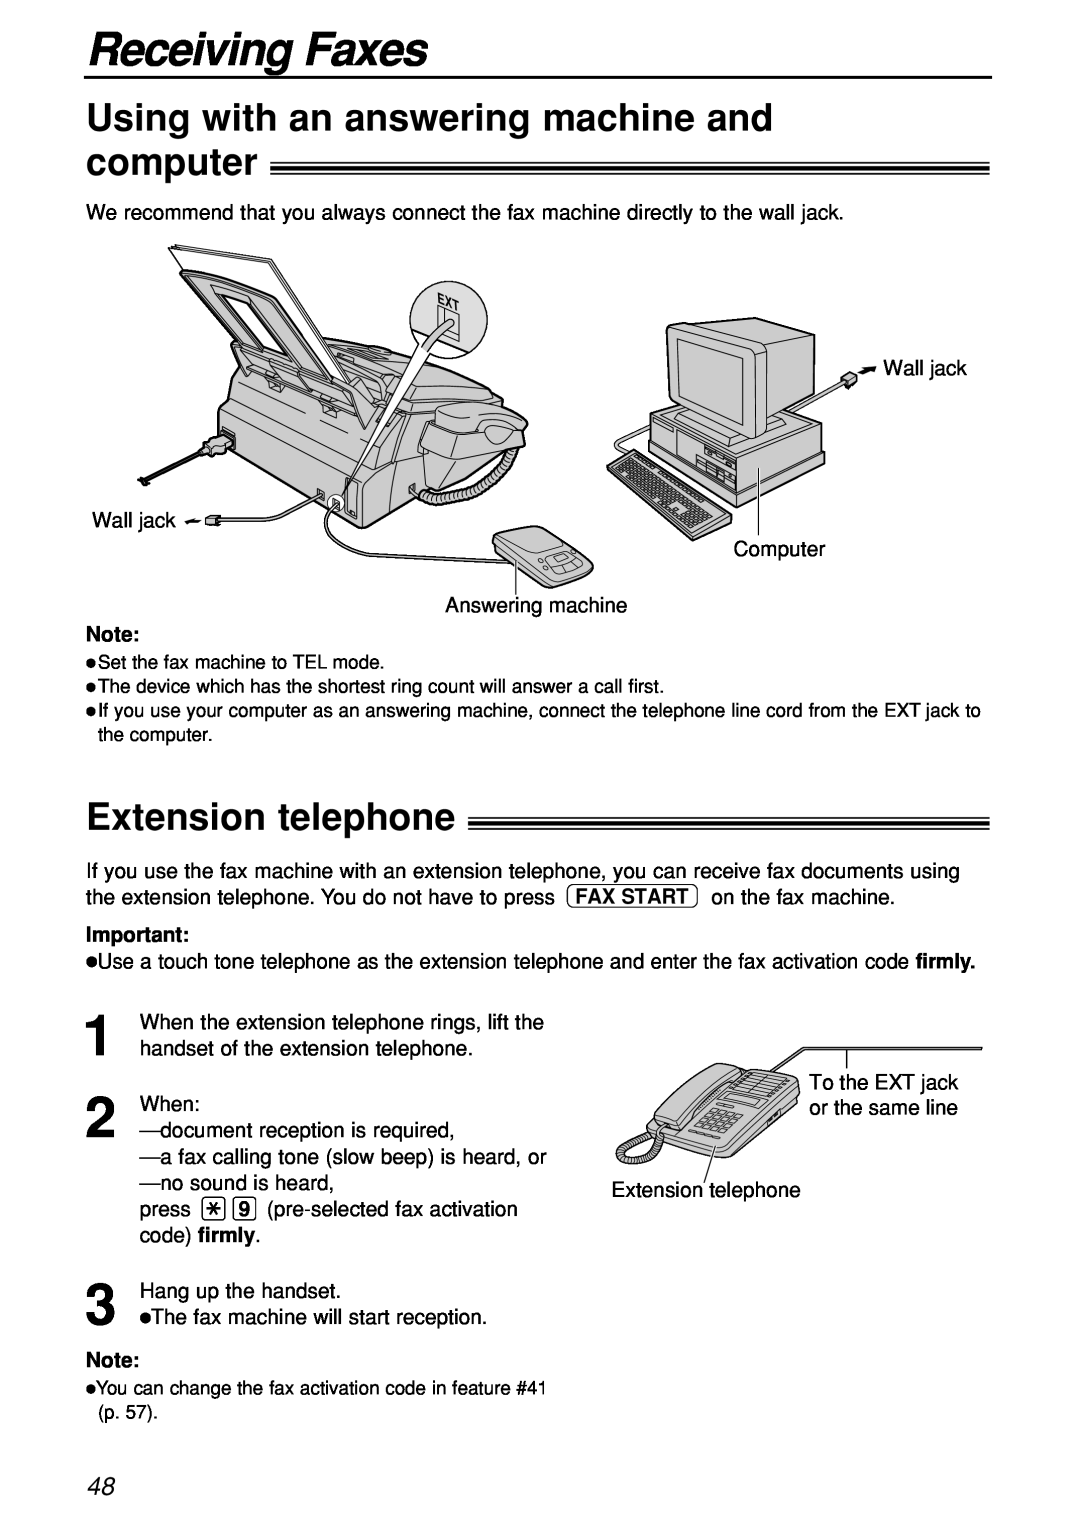 Panasonic KX-FL501C manual Using with an answering machine and computer, Extension telephone, Receiving Faxes 